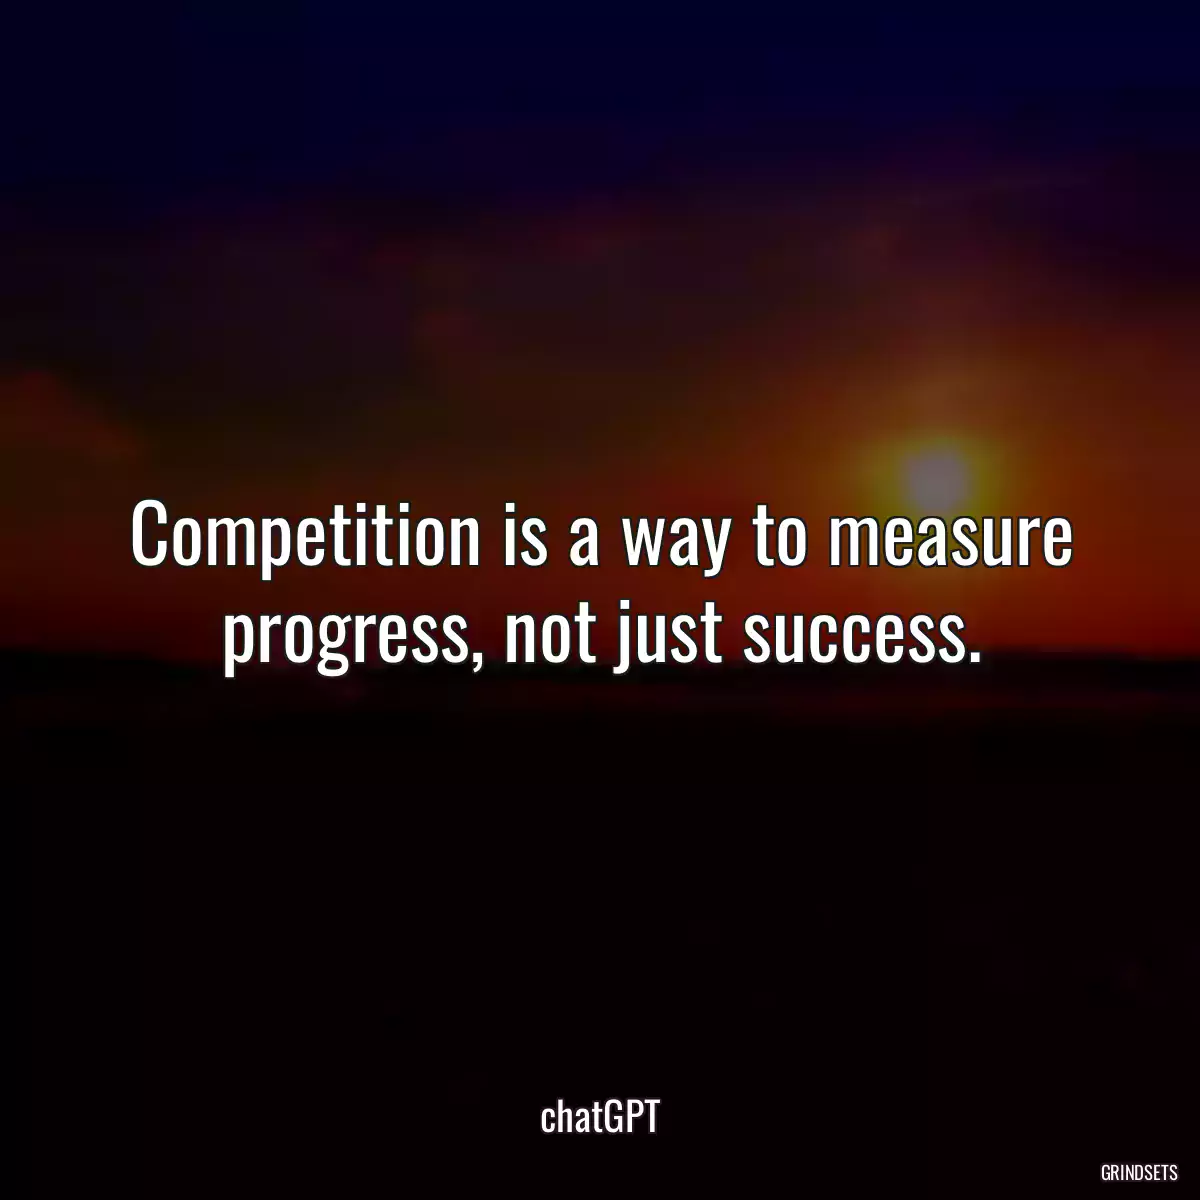 Competition is a way to measure progress, not just success.